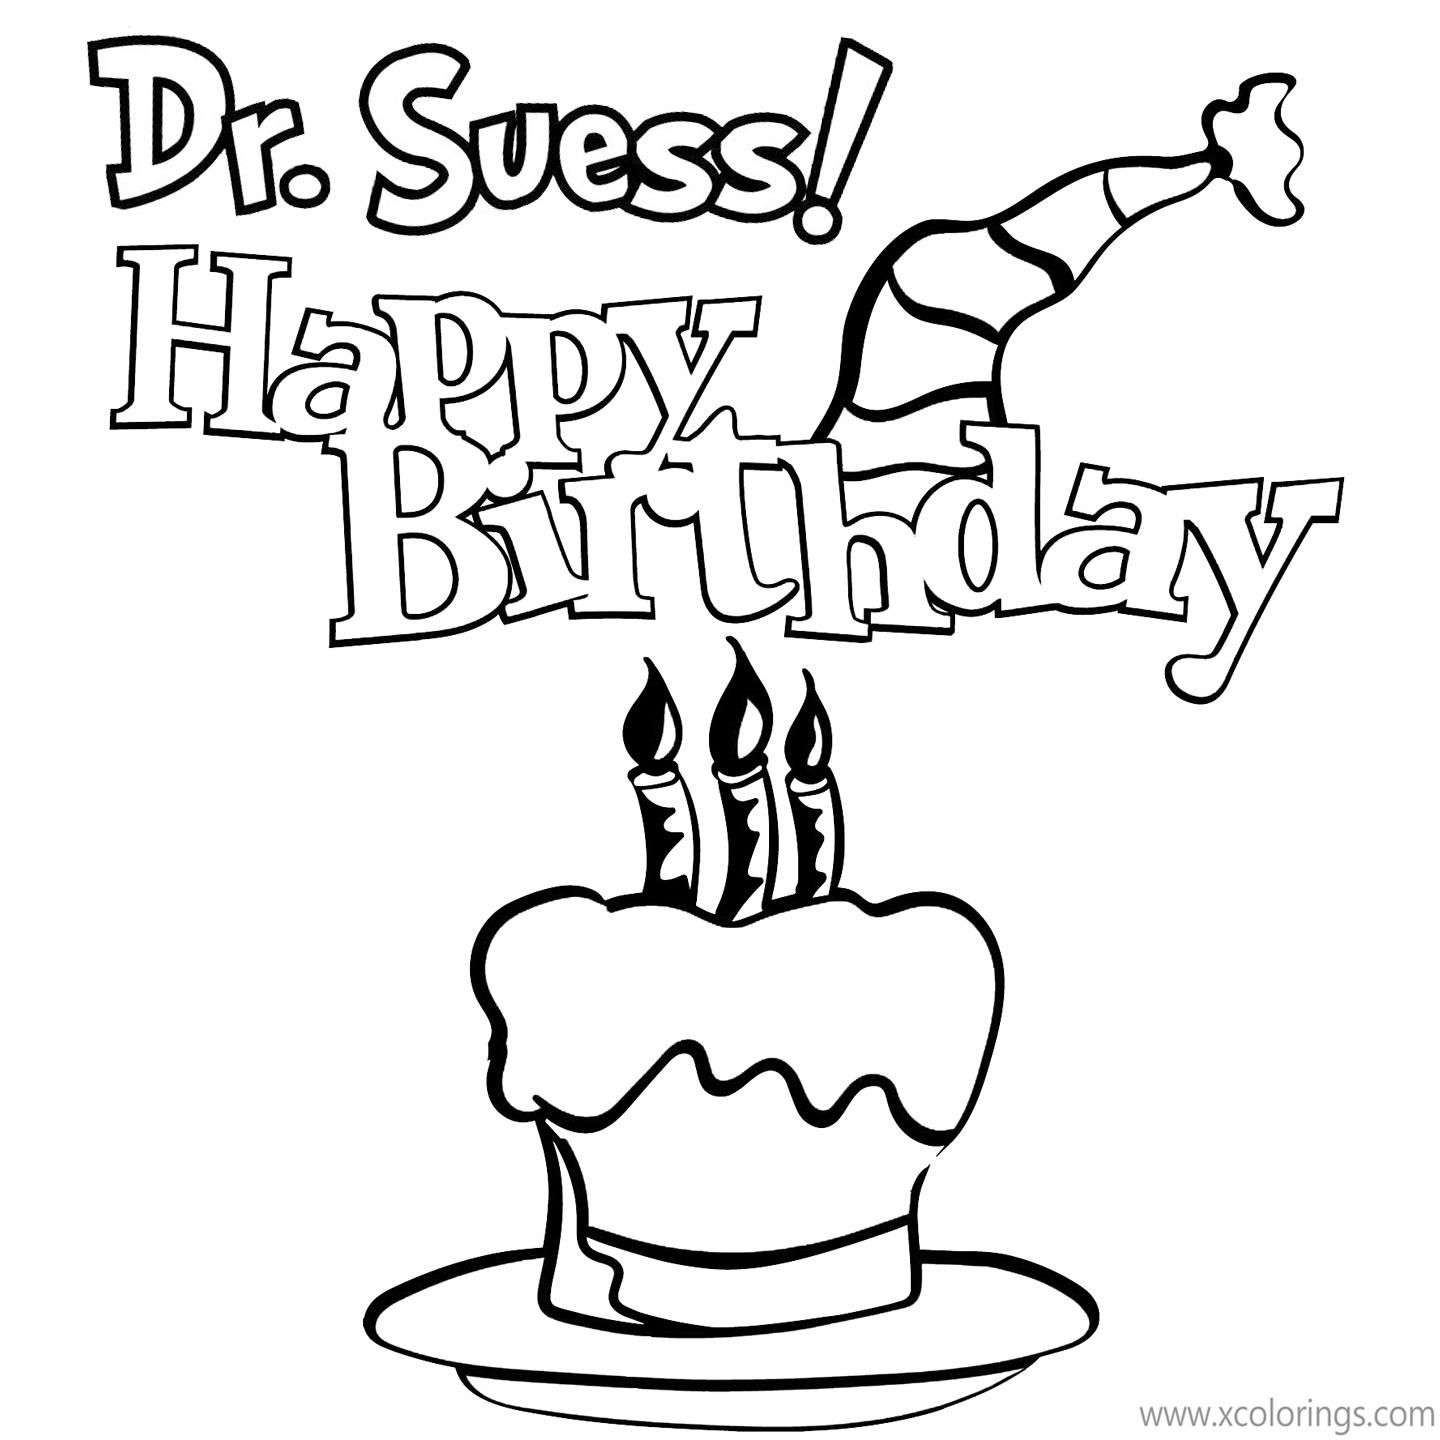 Happy Birthday Dr. Seuss Coloring Pages